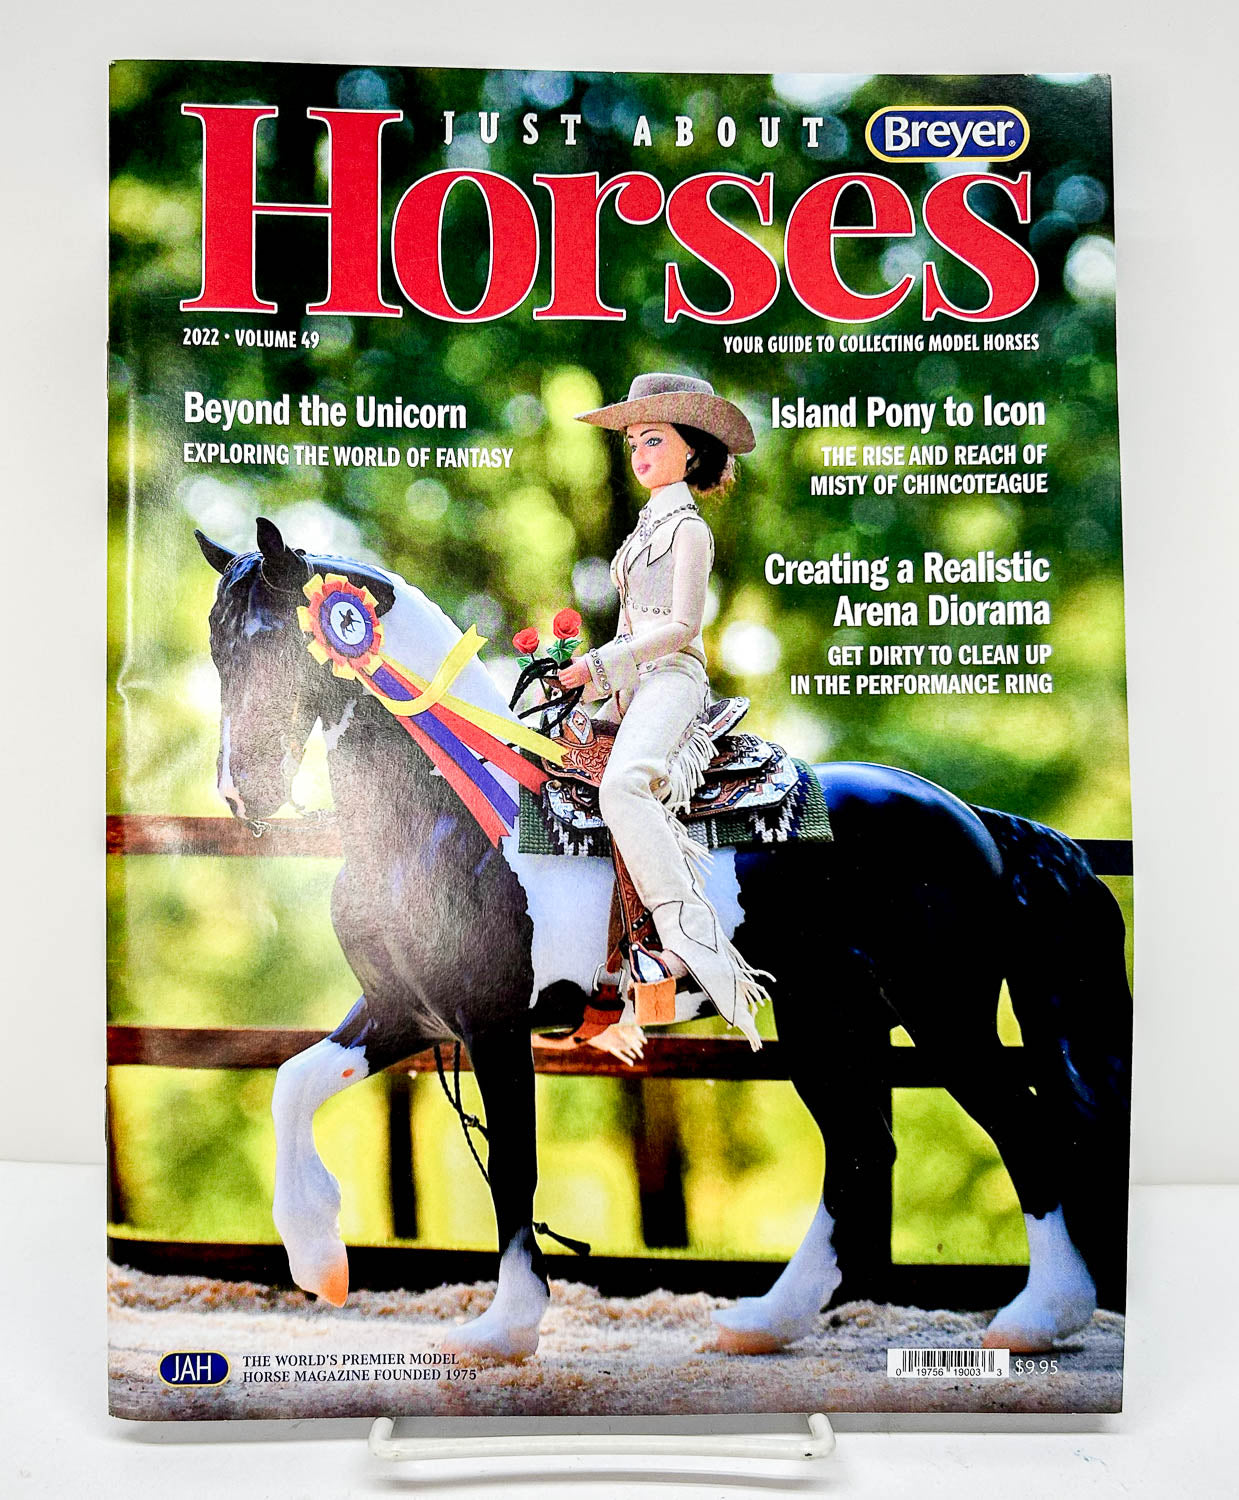 Just About Horses Magazine Vol. 49, 2022